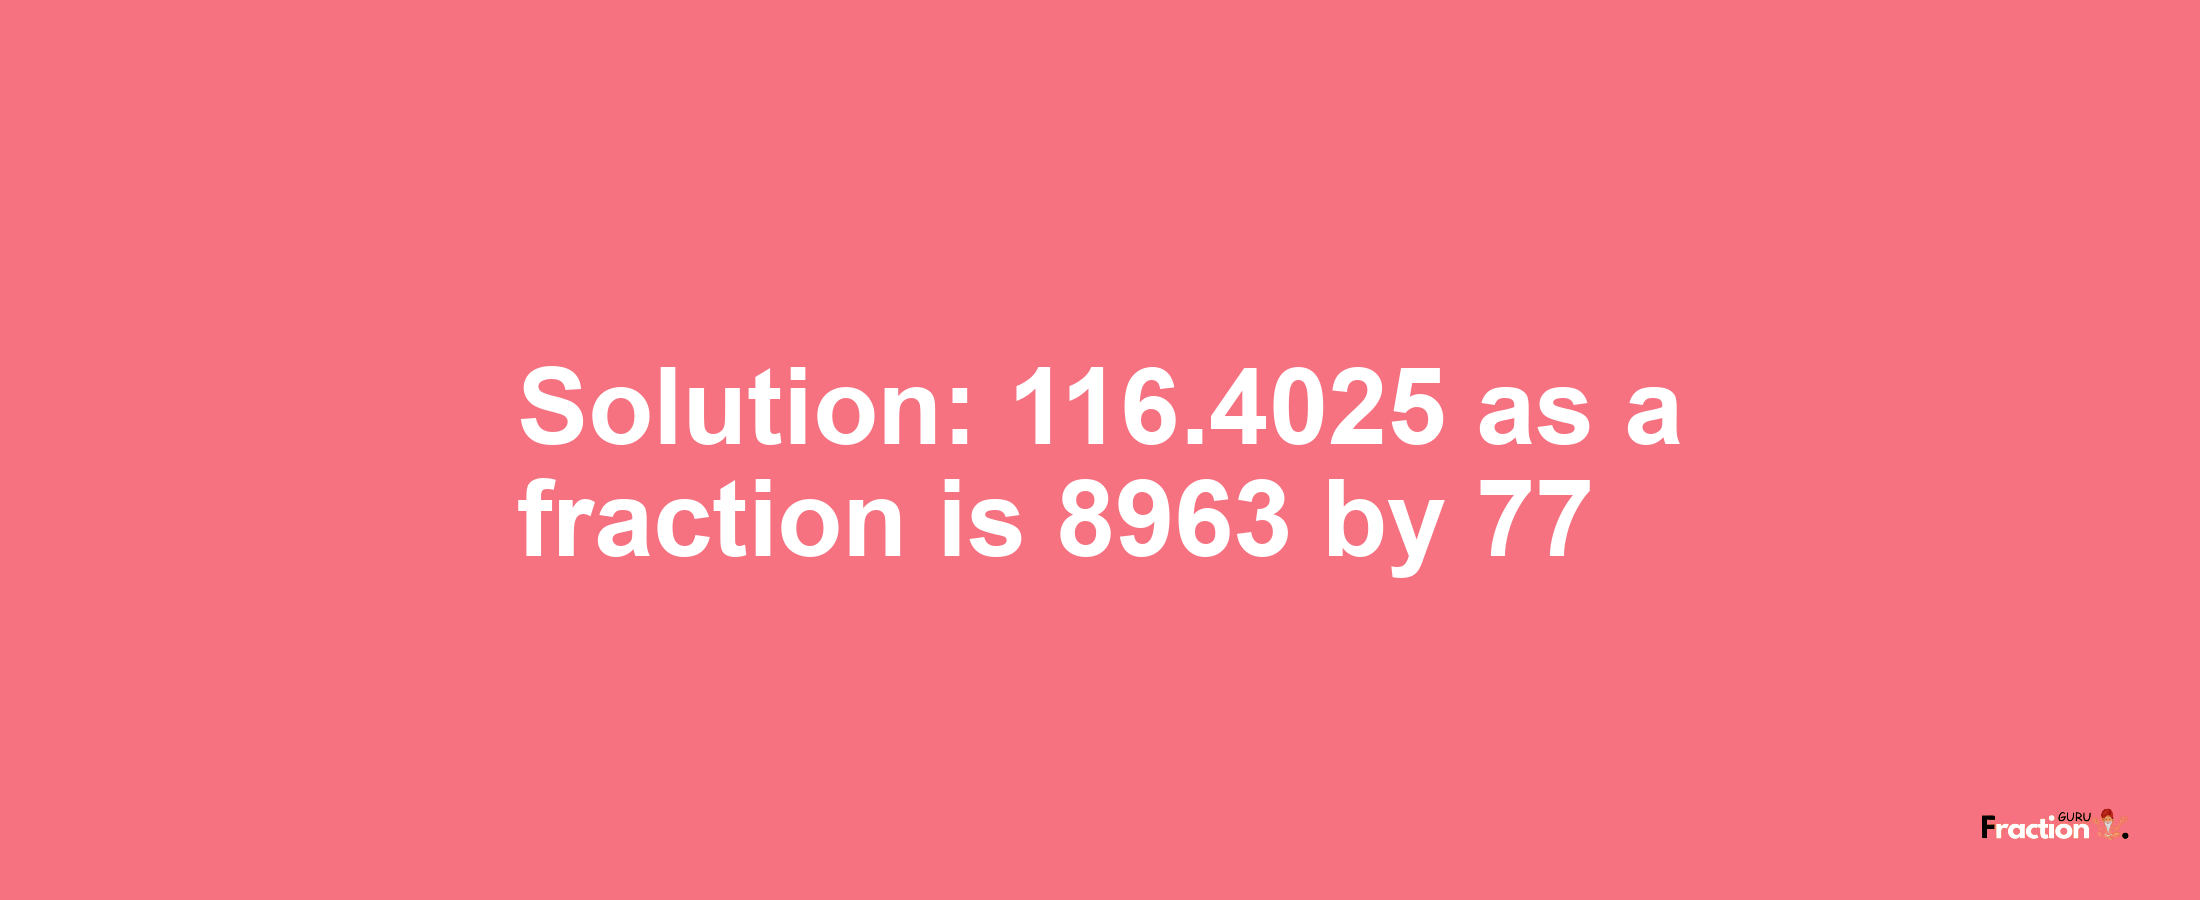 Solution:116.4025 as a fraction is 8963/77